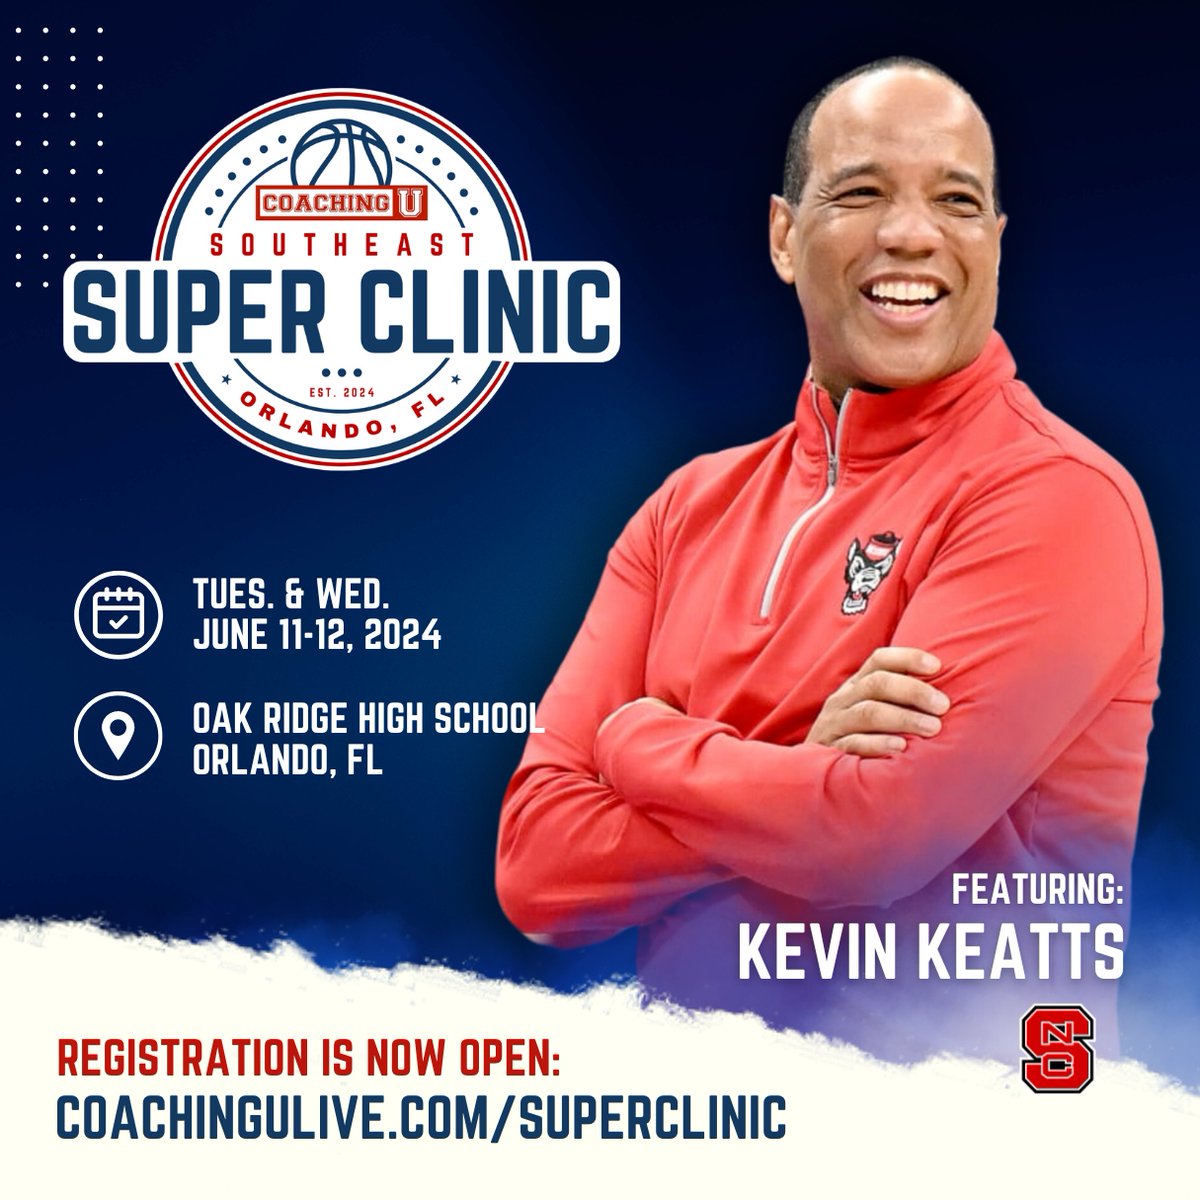 🏀 Coaching U returns to Orlando this summer for the 1st ever Southeast Super Clinic featuring NC State head coach Kevin Keatts fresh of his Final Four appearance! 🗓️ June 11-12, 2024 📍 Orlando, FL 🎟️ Registration is now open: 🔗 coachingulive.com/superclinic